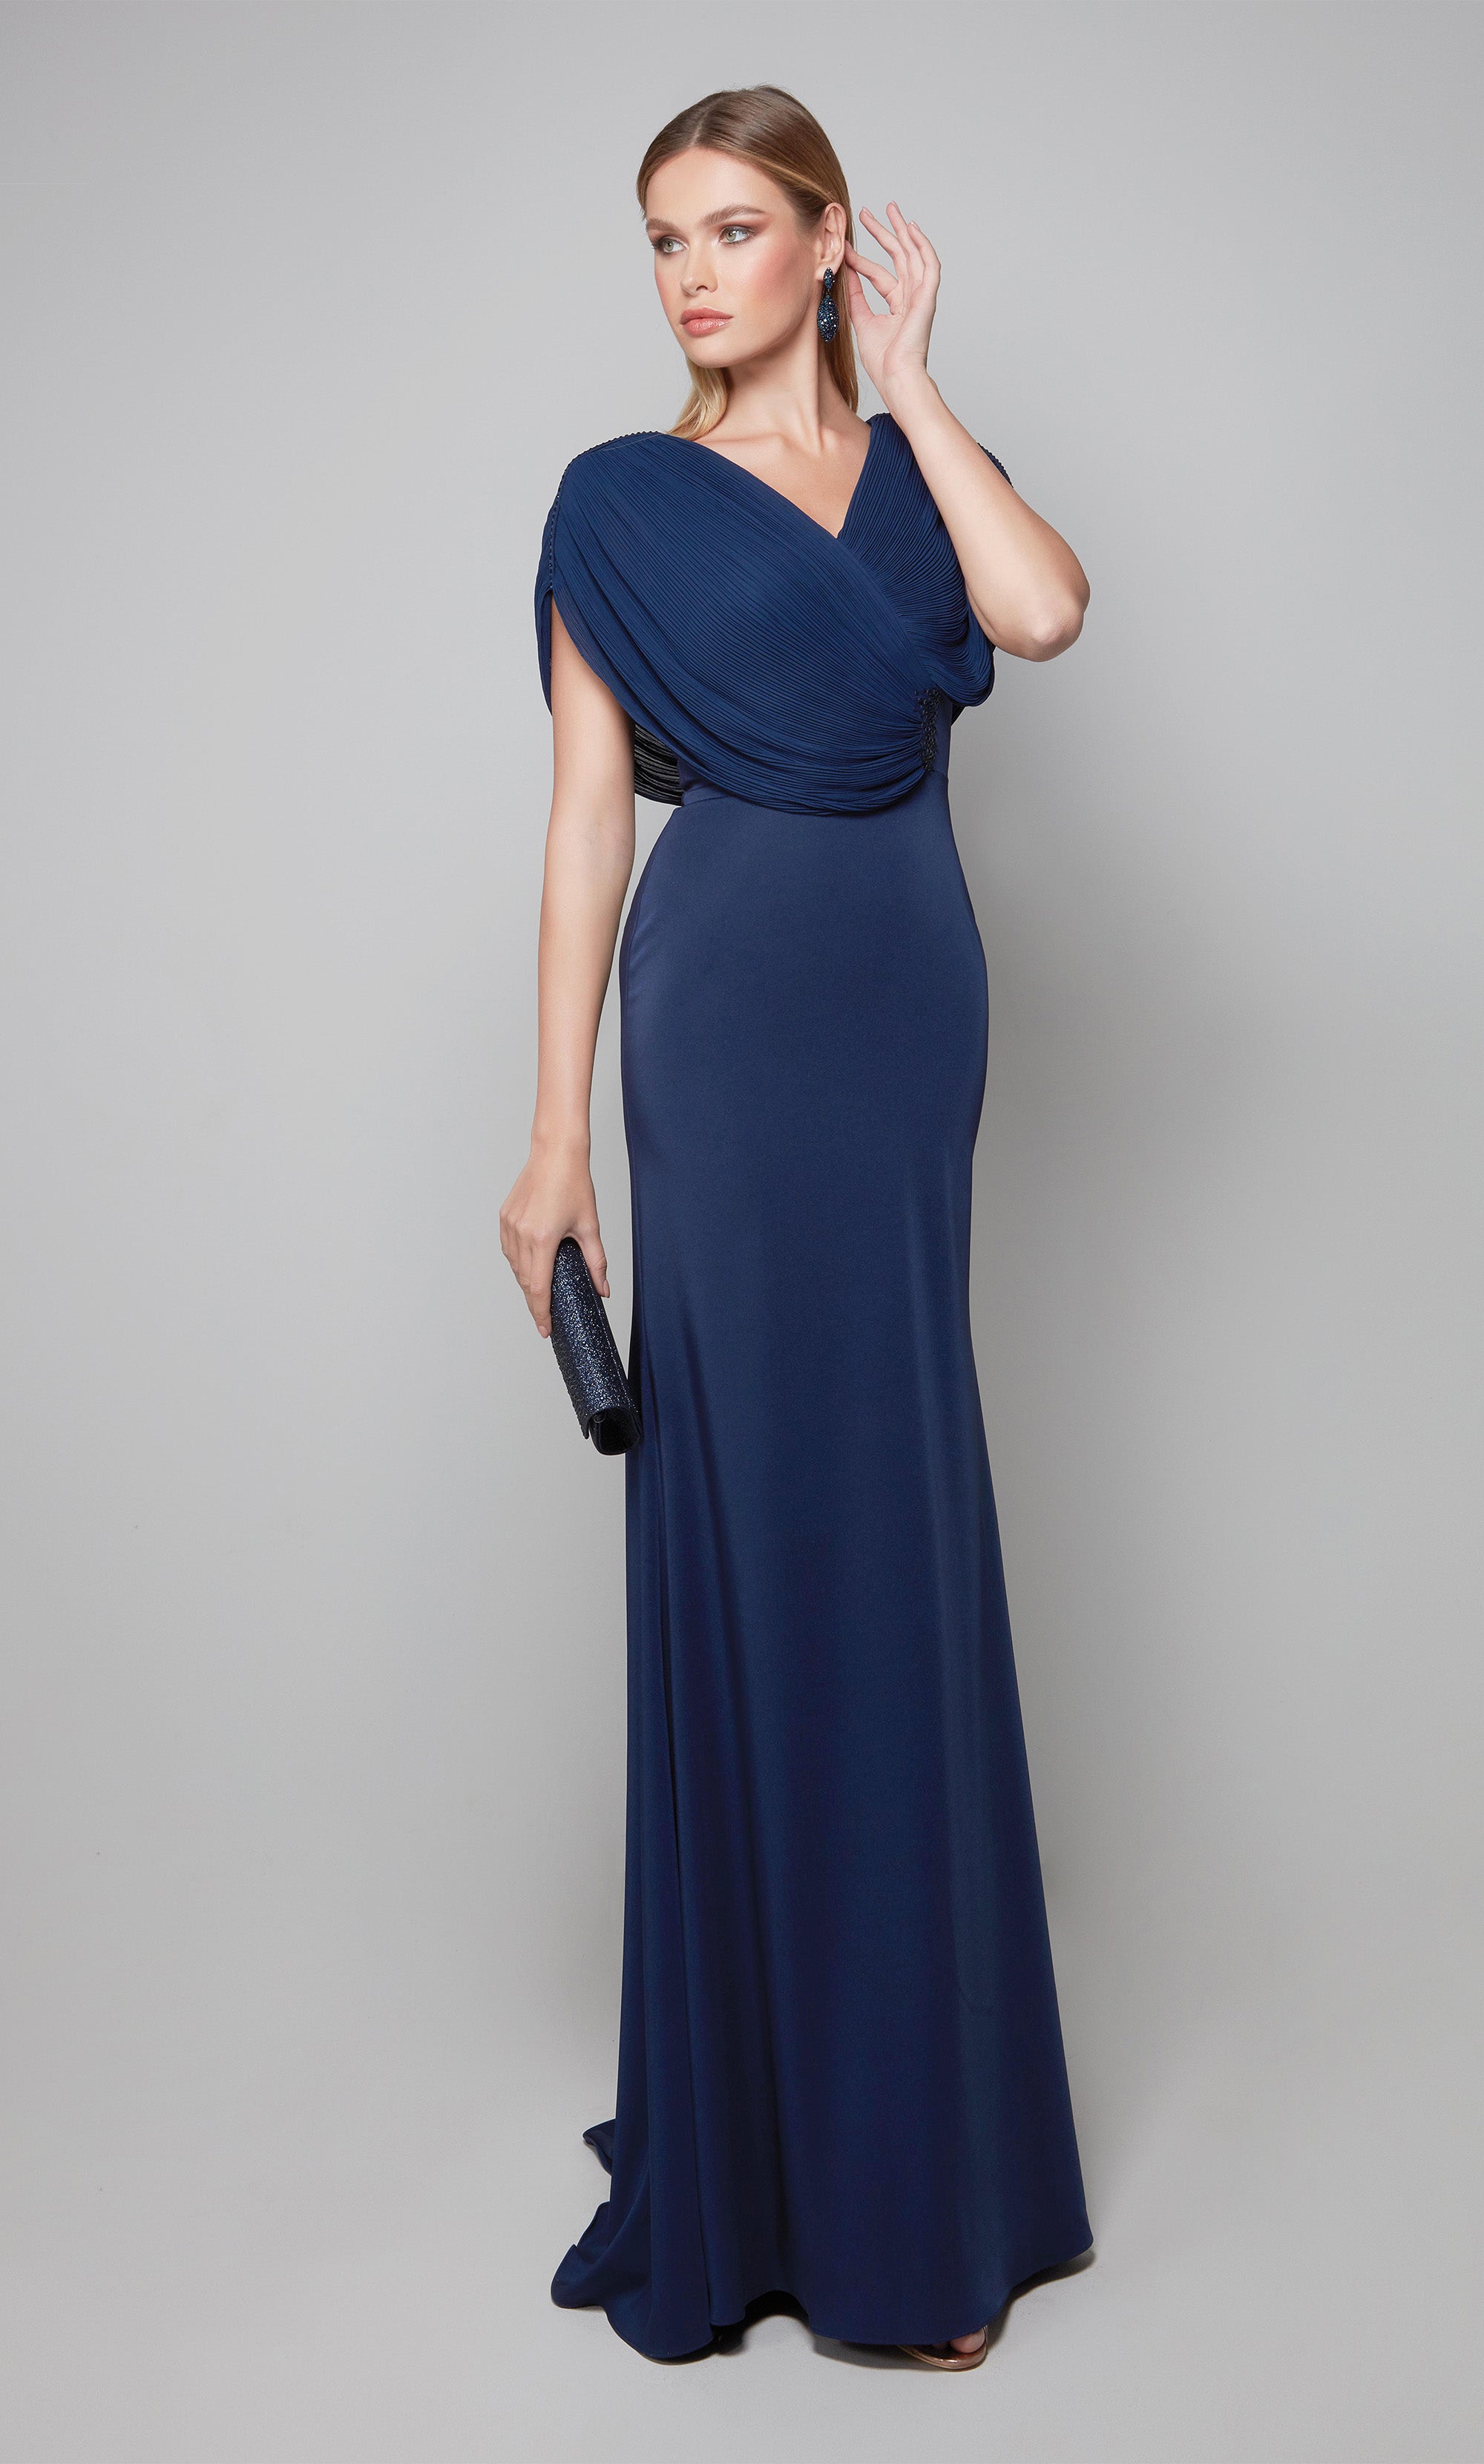 Buy Blue Dresses & Gowns for Women by Cora Online | Ajio.com